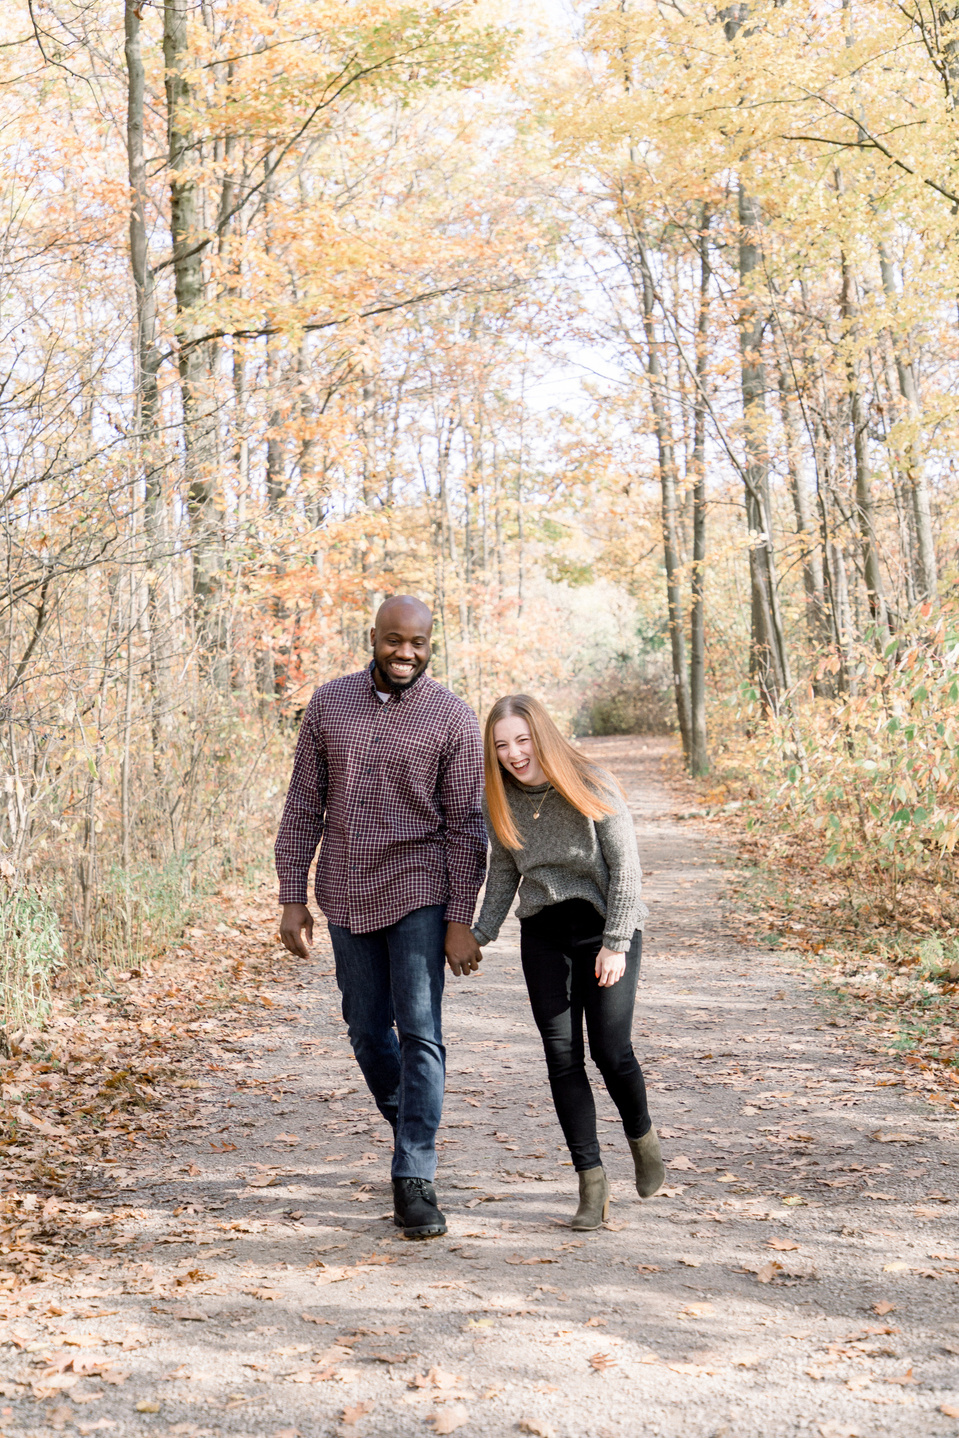 Portrait of couple walking down path, bumping hips and laughing. Niagara portrait photography, Niagara portrait photographer, Niagara family photography, Niagara family photographer.